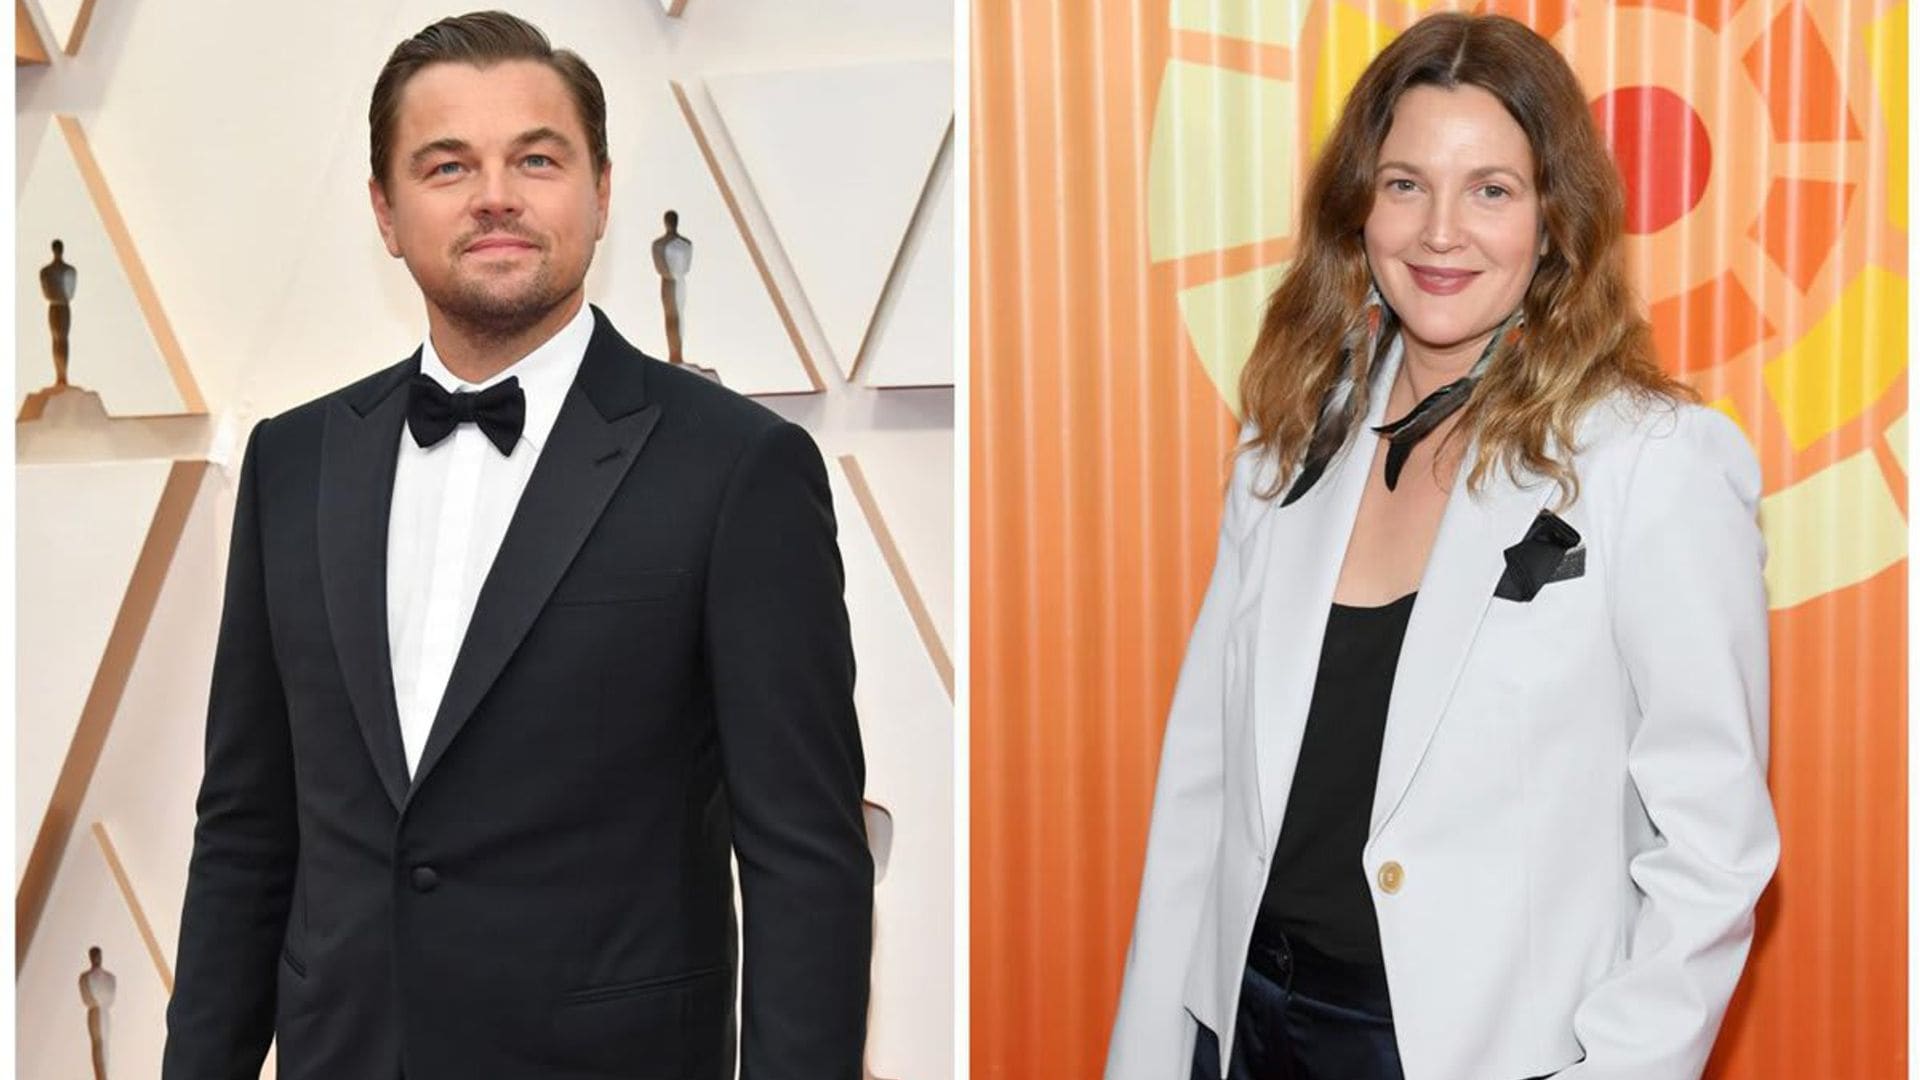 Drew Barrymore flirted with Leonardo DiCaprio on Instagram and we’re applauding her for it